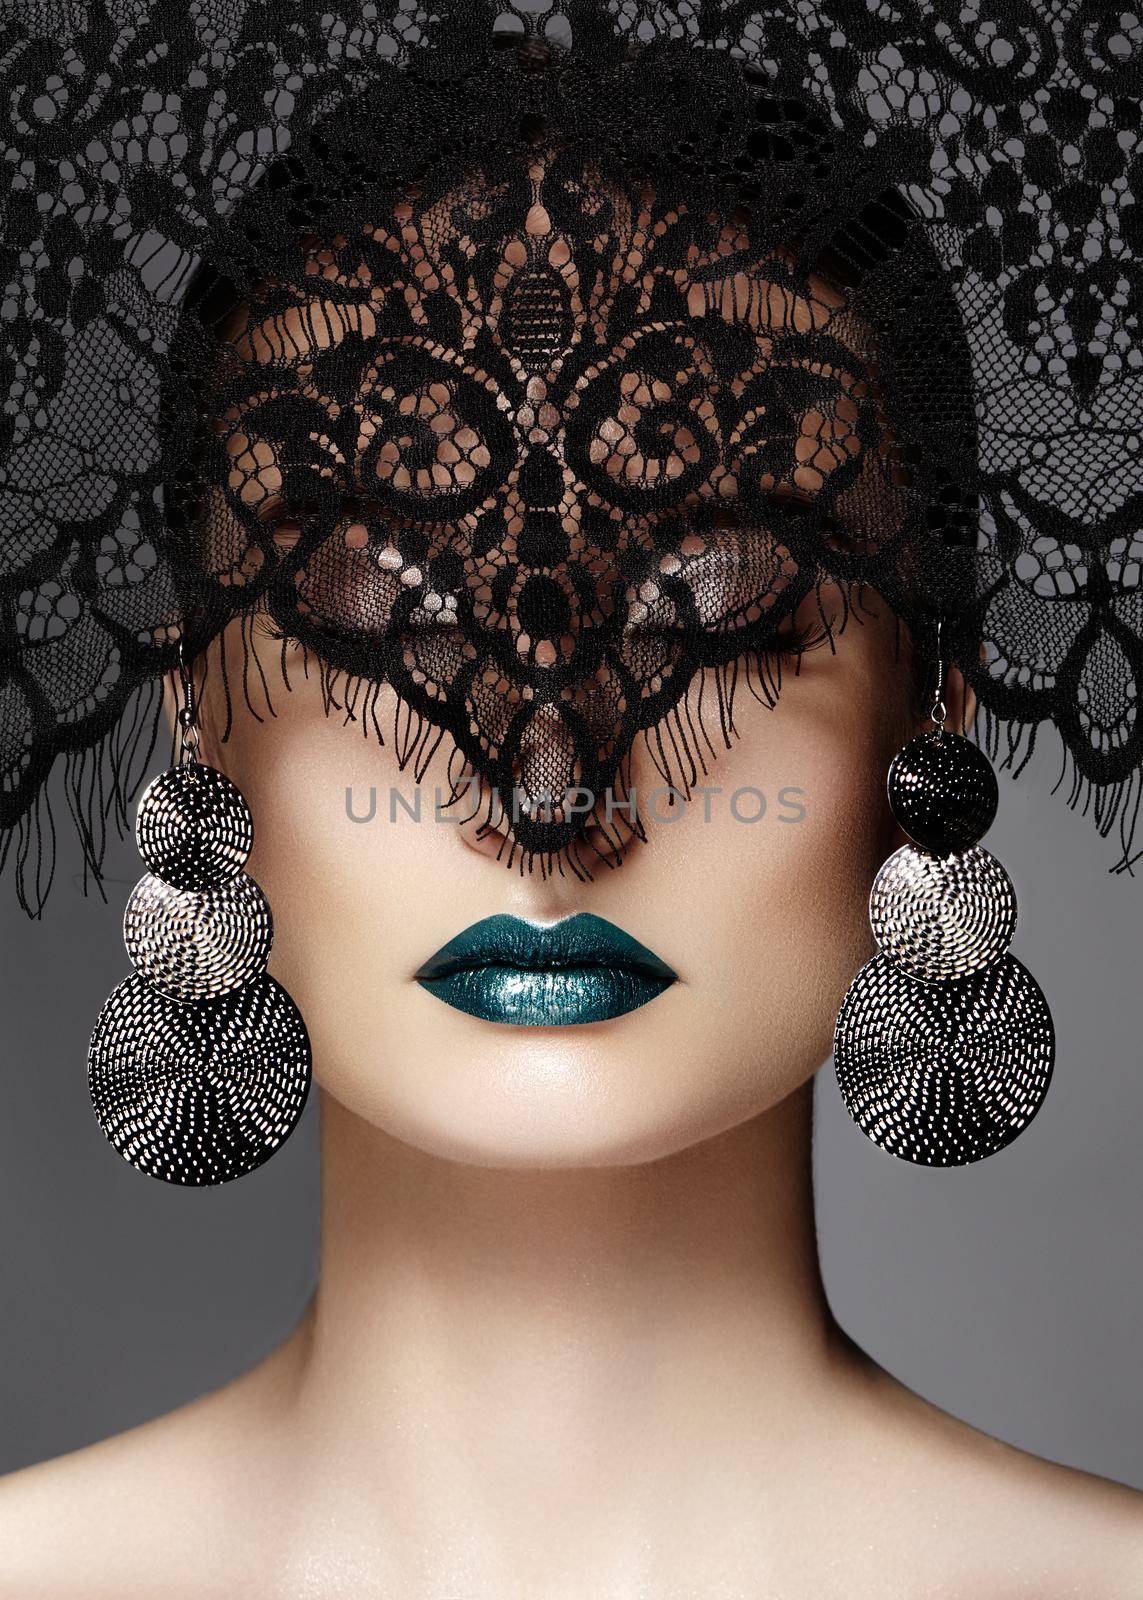 Luxury Woman with Celebrate Fashion Makeup, silver Earrings, black dramatic Lace veil. Halloween sexy witch look or luxe Christmas style. Green metallic Lips Make-up